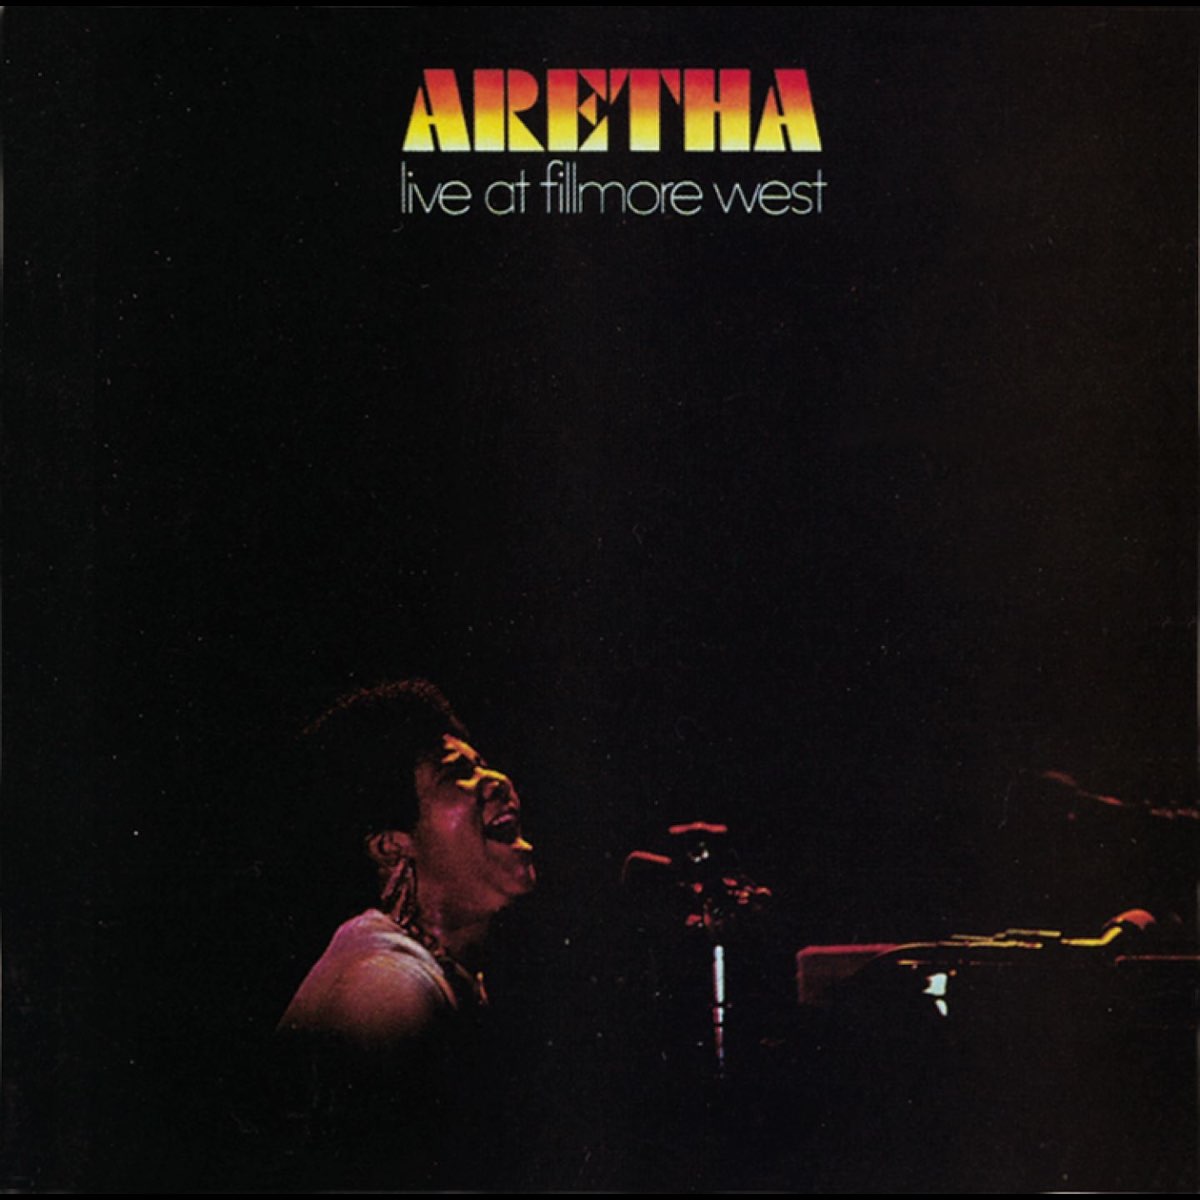 Live At Fillmore West》- Aretha Franklin的专辑- Apple Music